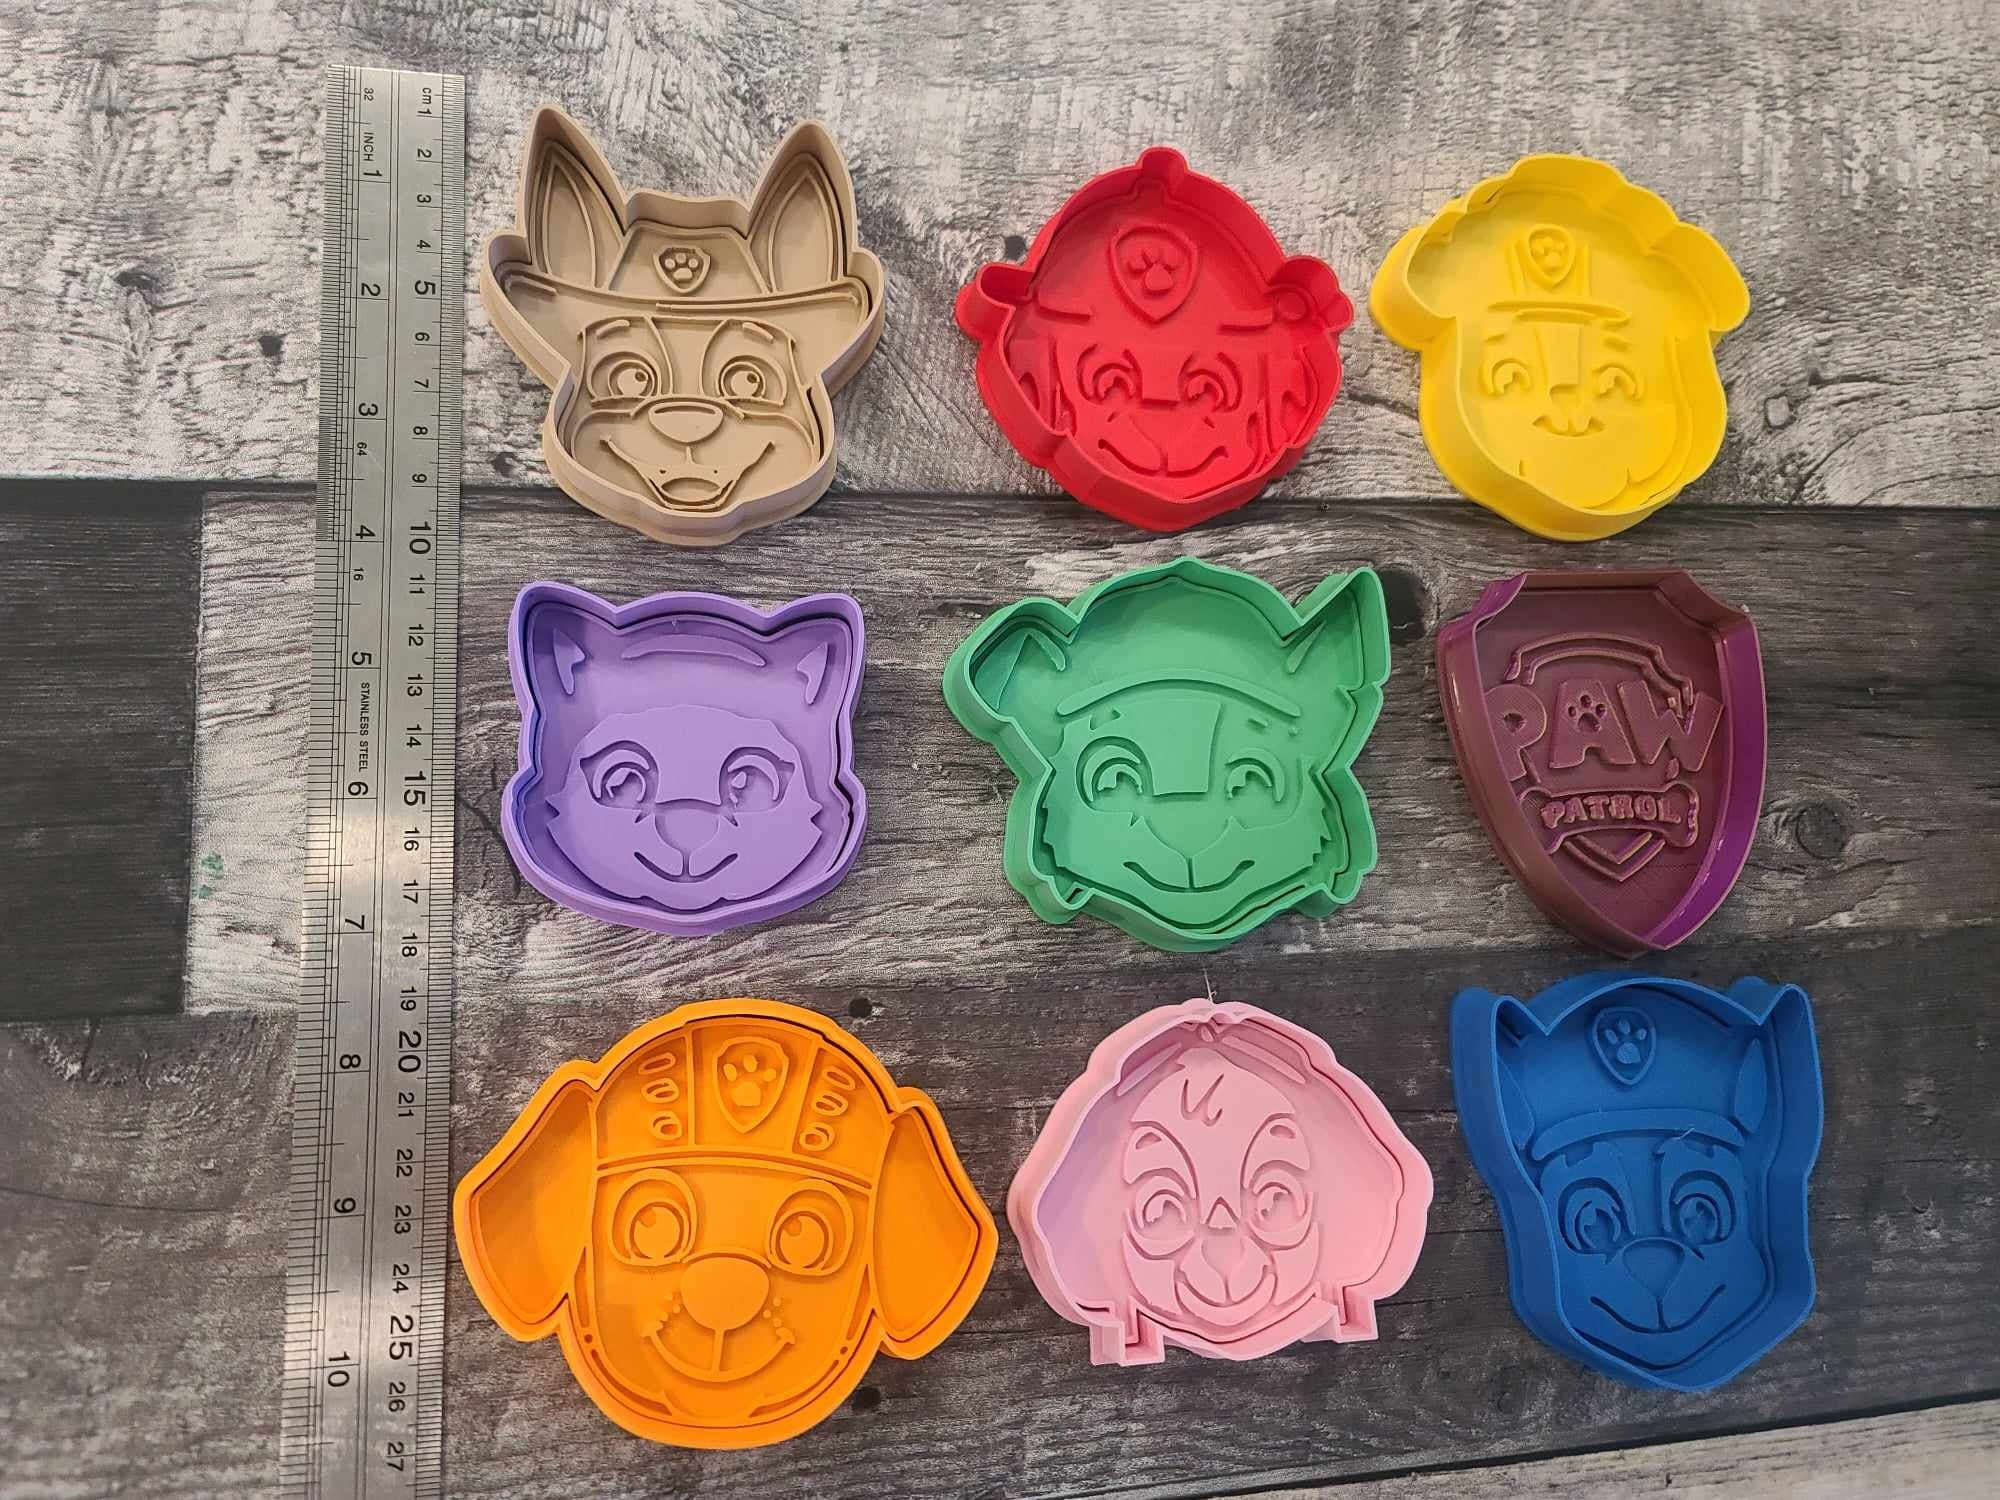 Paw patrol cookie cutter -  France